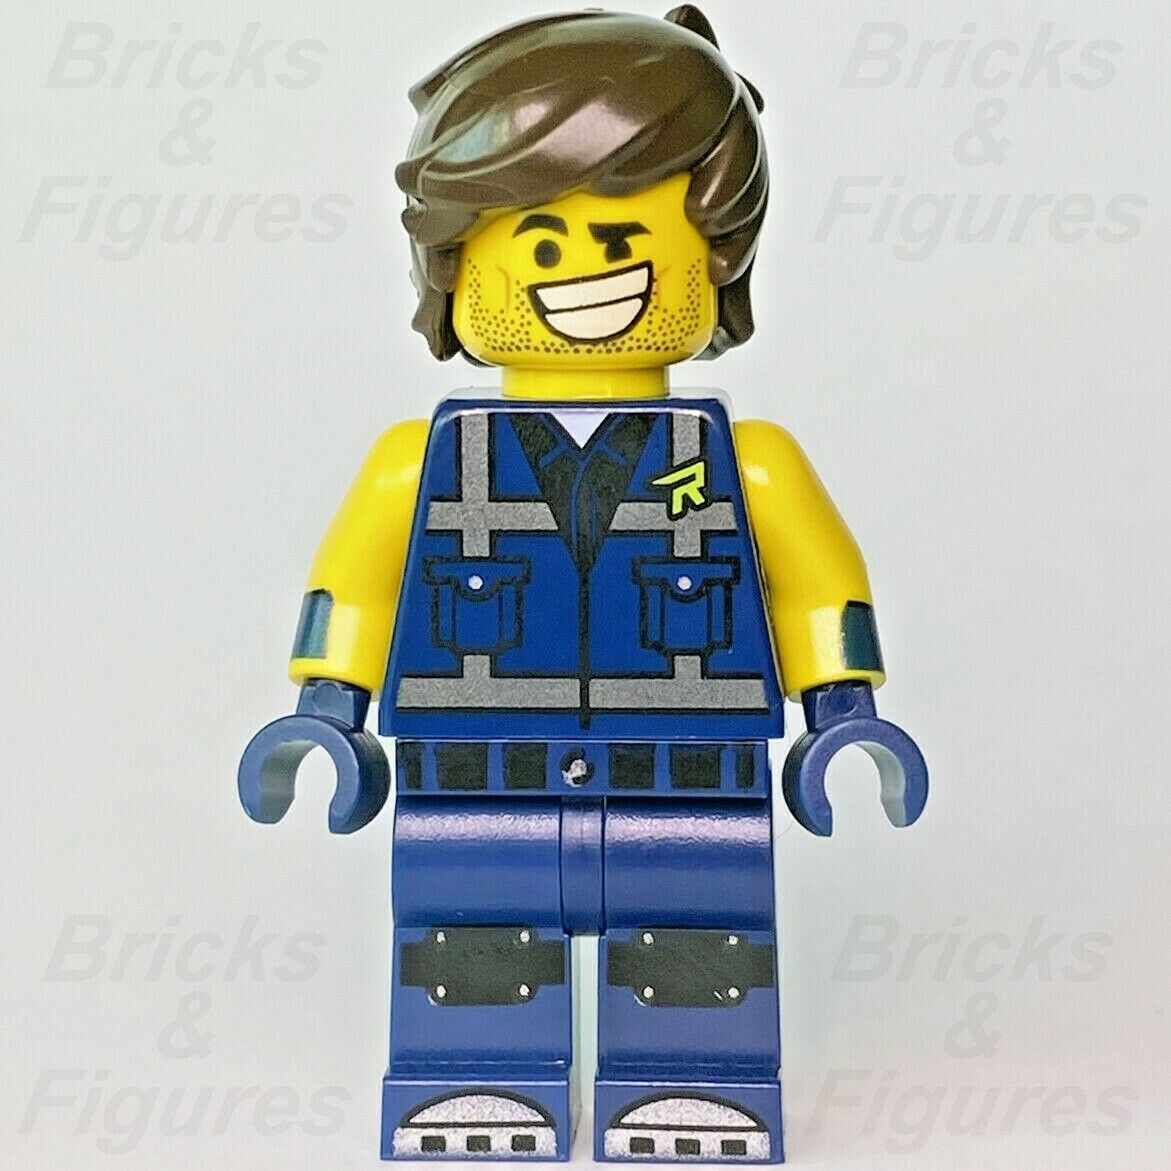 Rex Dangervest The LEGO Movie 2 Crooked Smile / Angry Minifigure 70839 tlm197 - Bricks & Figures